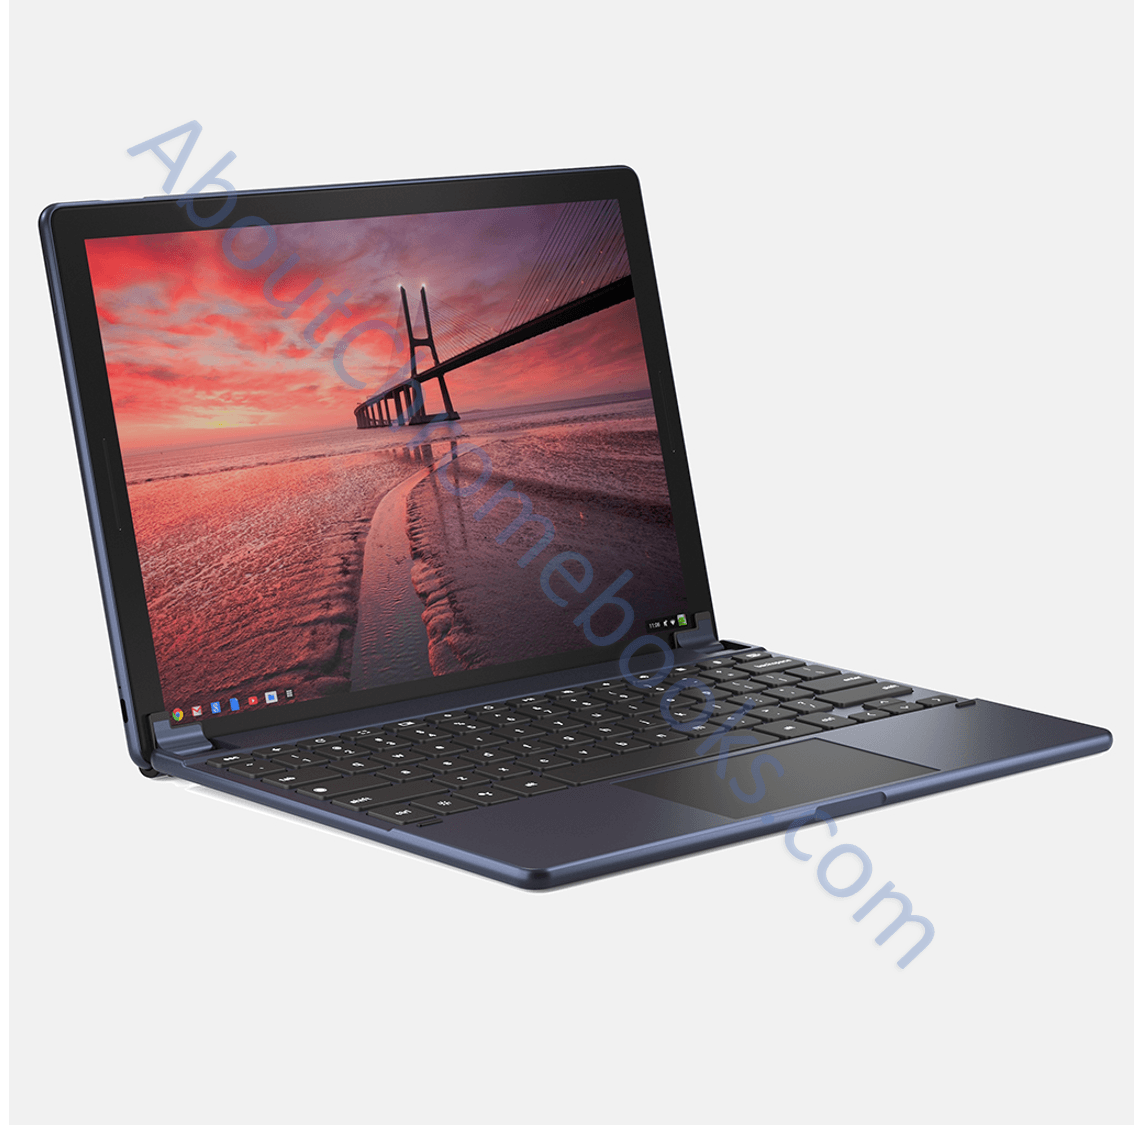 Here are the Brydge Wallaby and Goanna keyboards for Chrome OS tablets